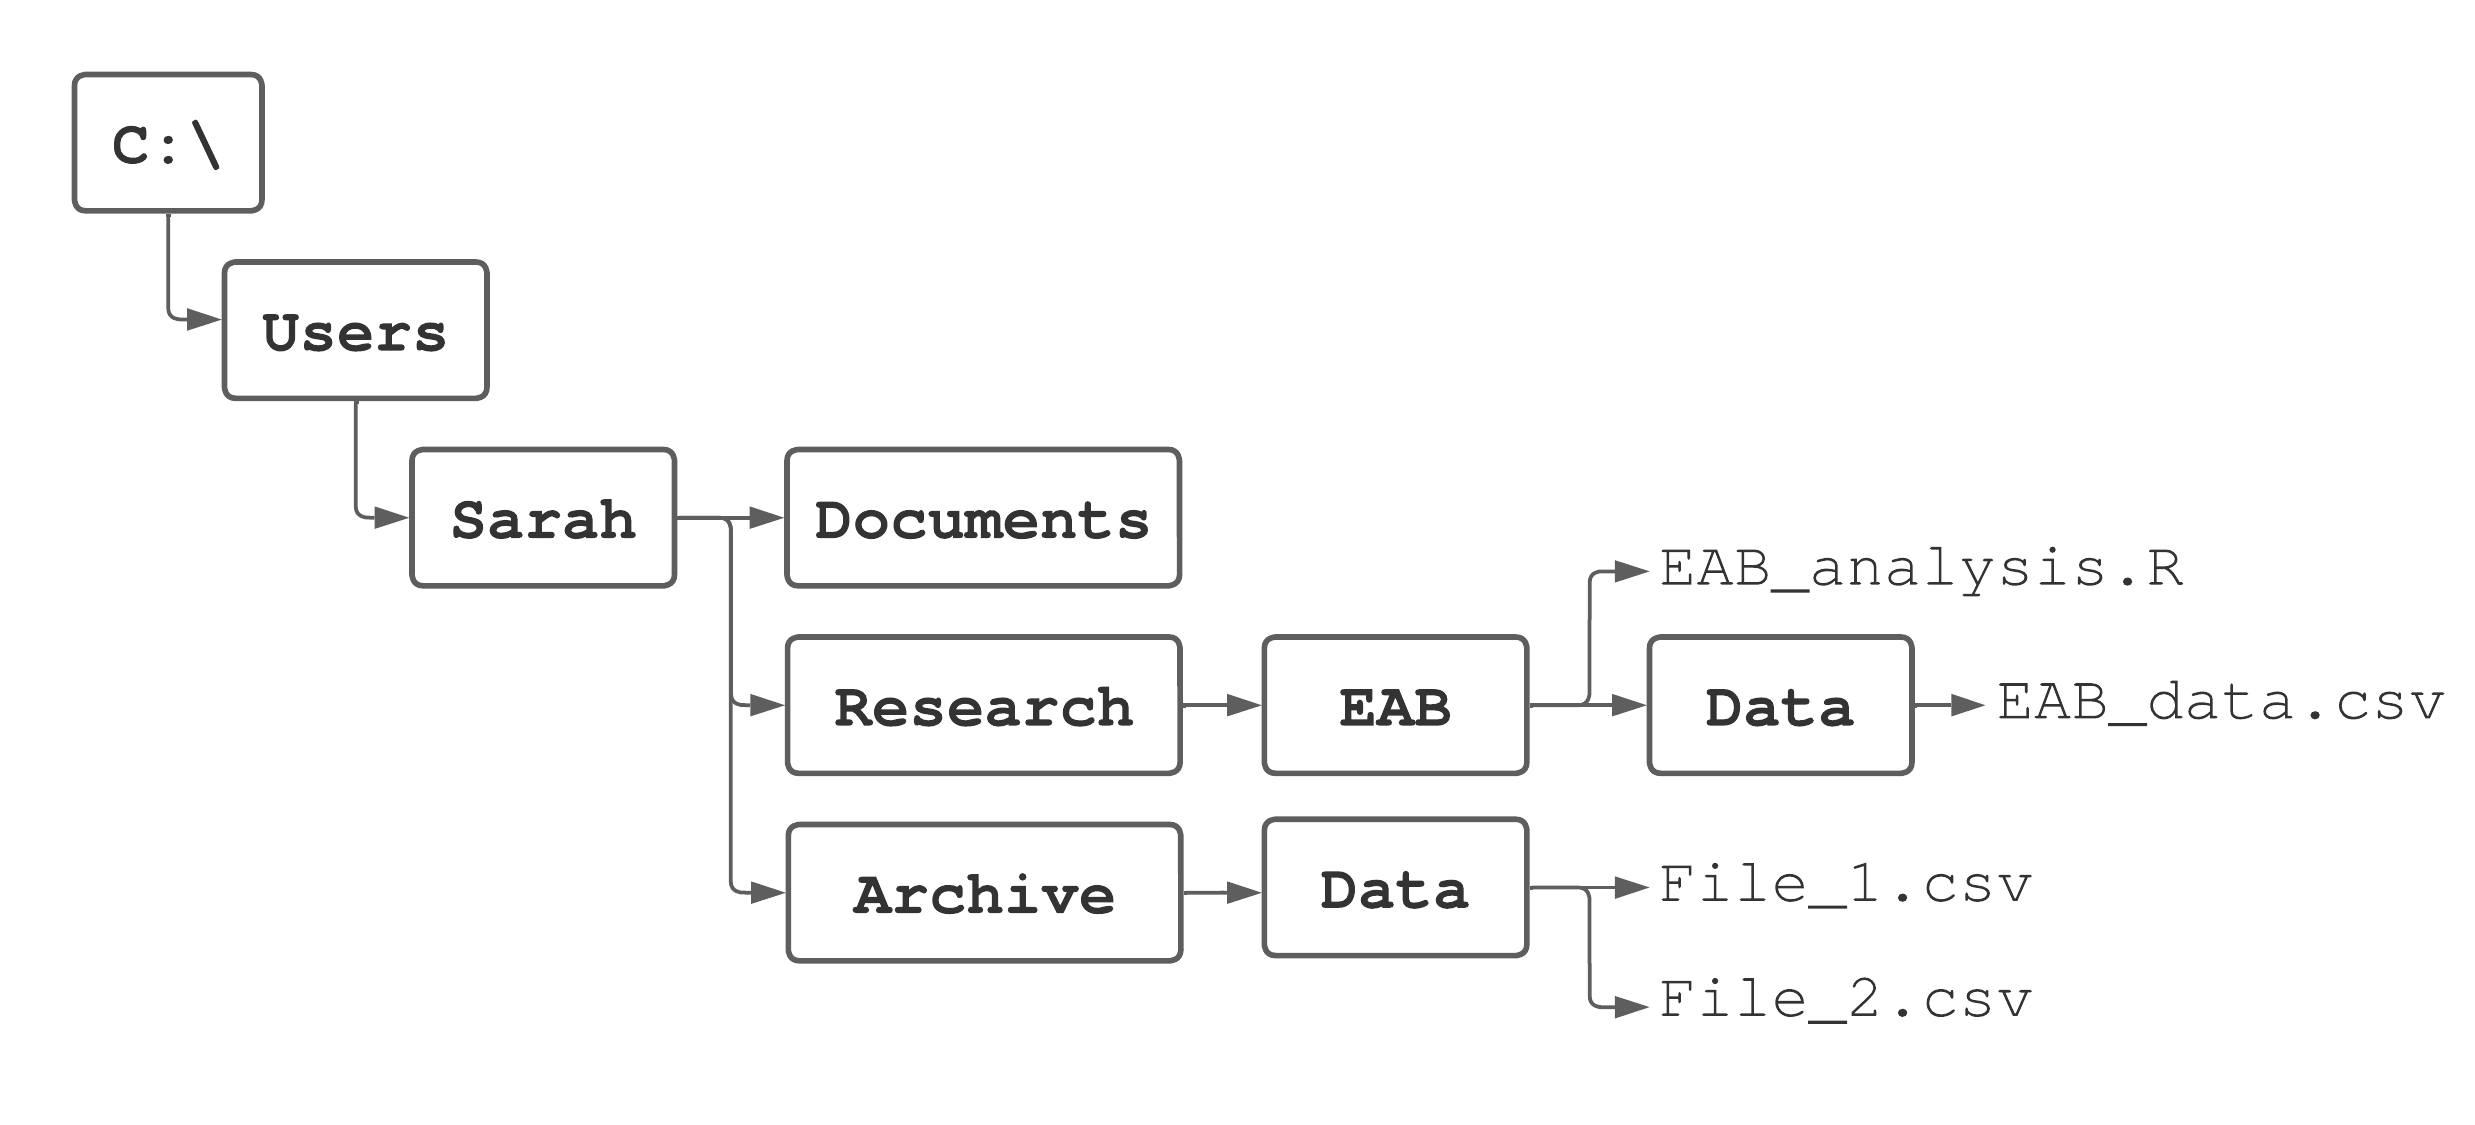 A directory structure used for illustration.